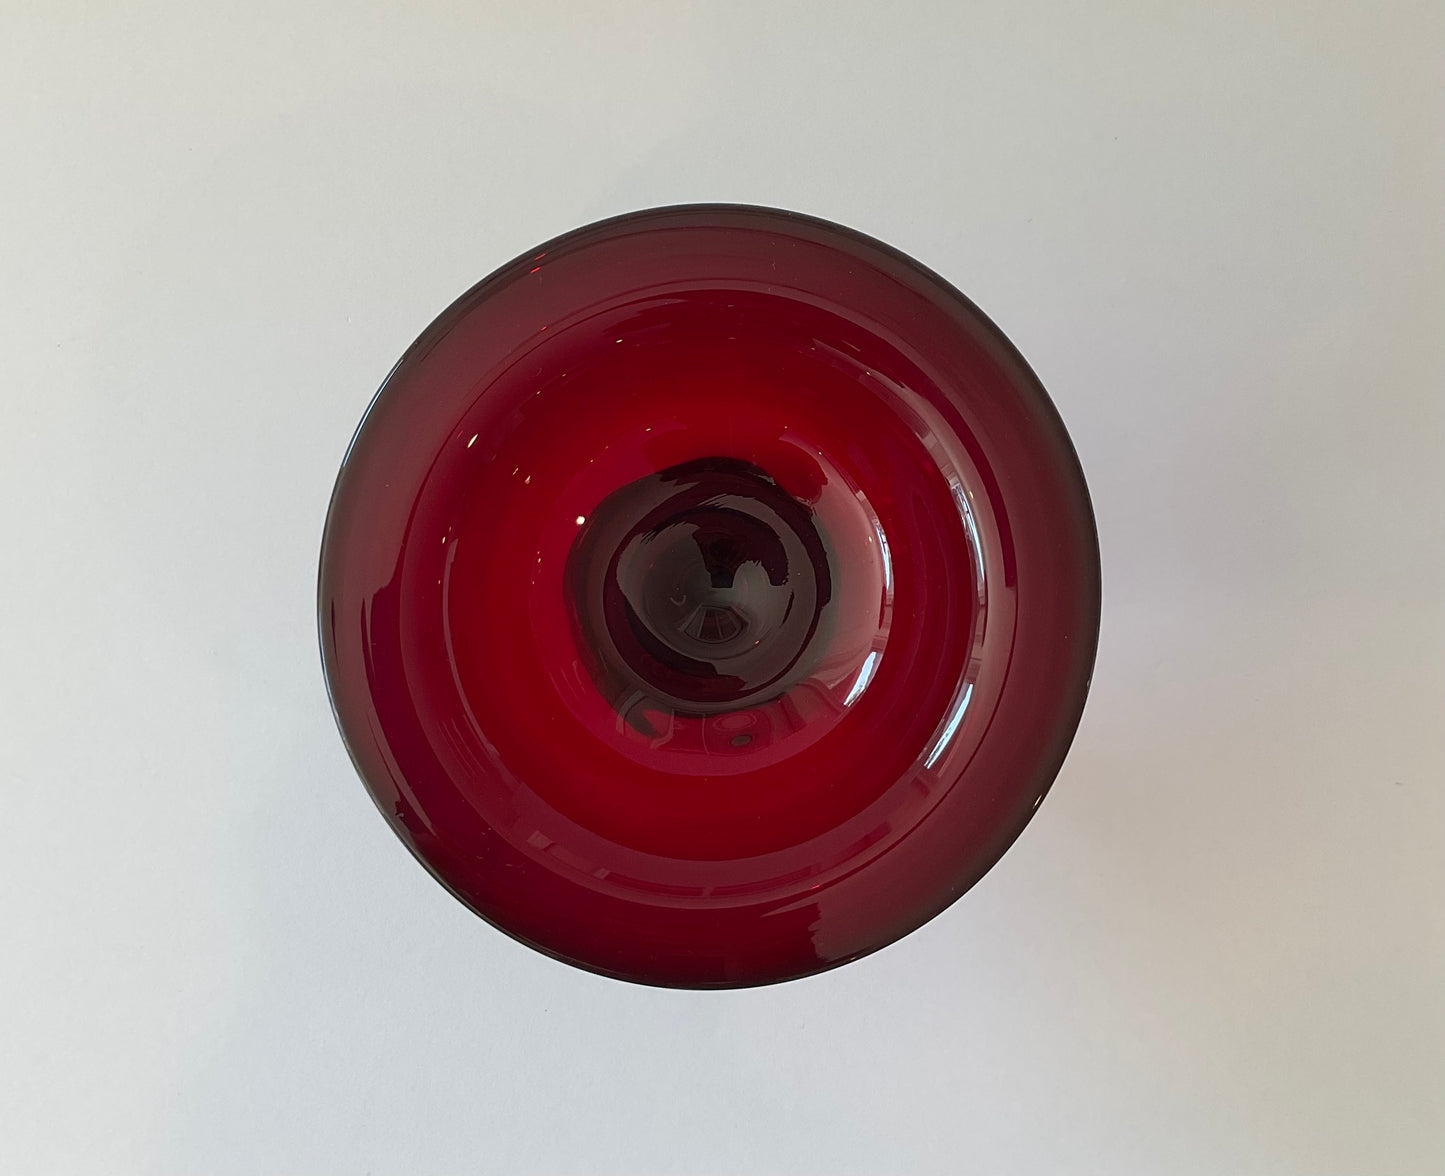 Ruby Red Pedestal Candy Dish